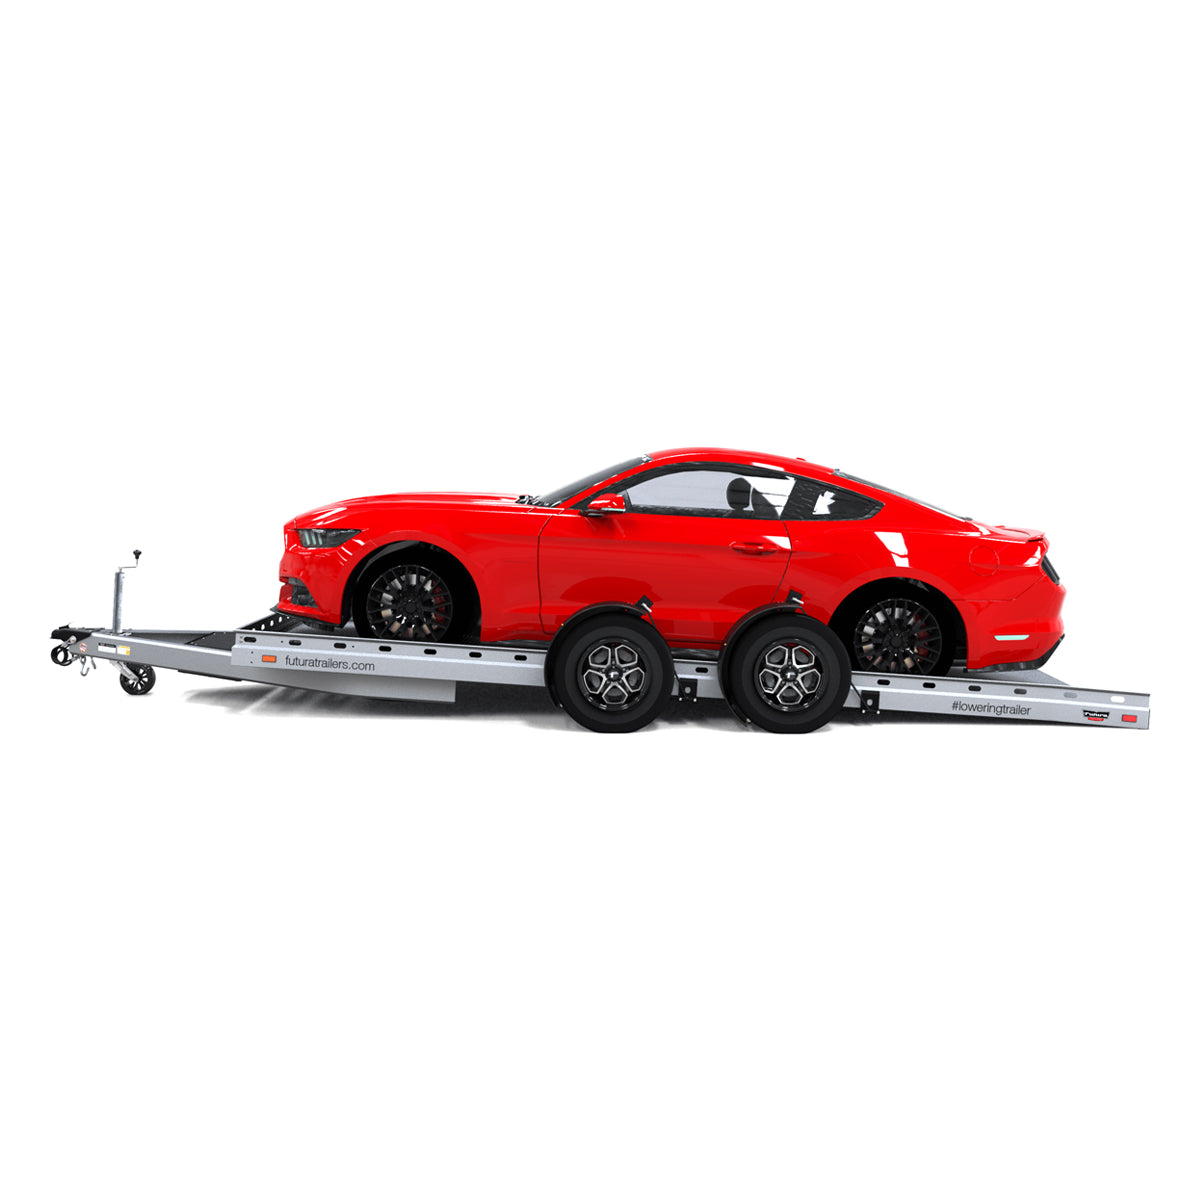 Super Sport Lowering Trailer from $14,995*